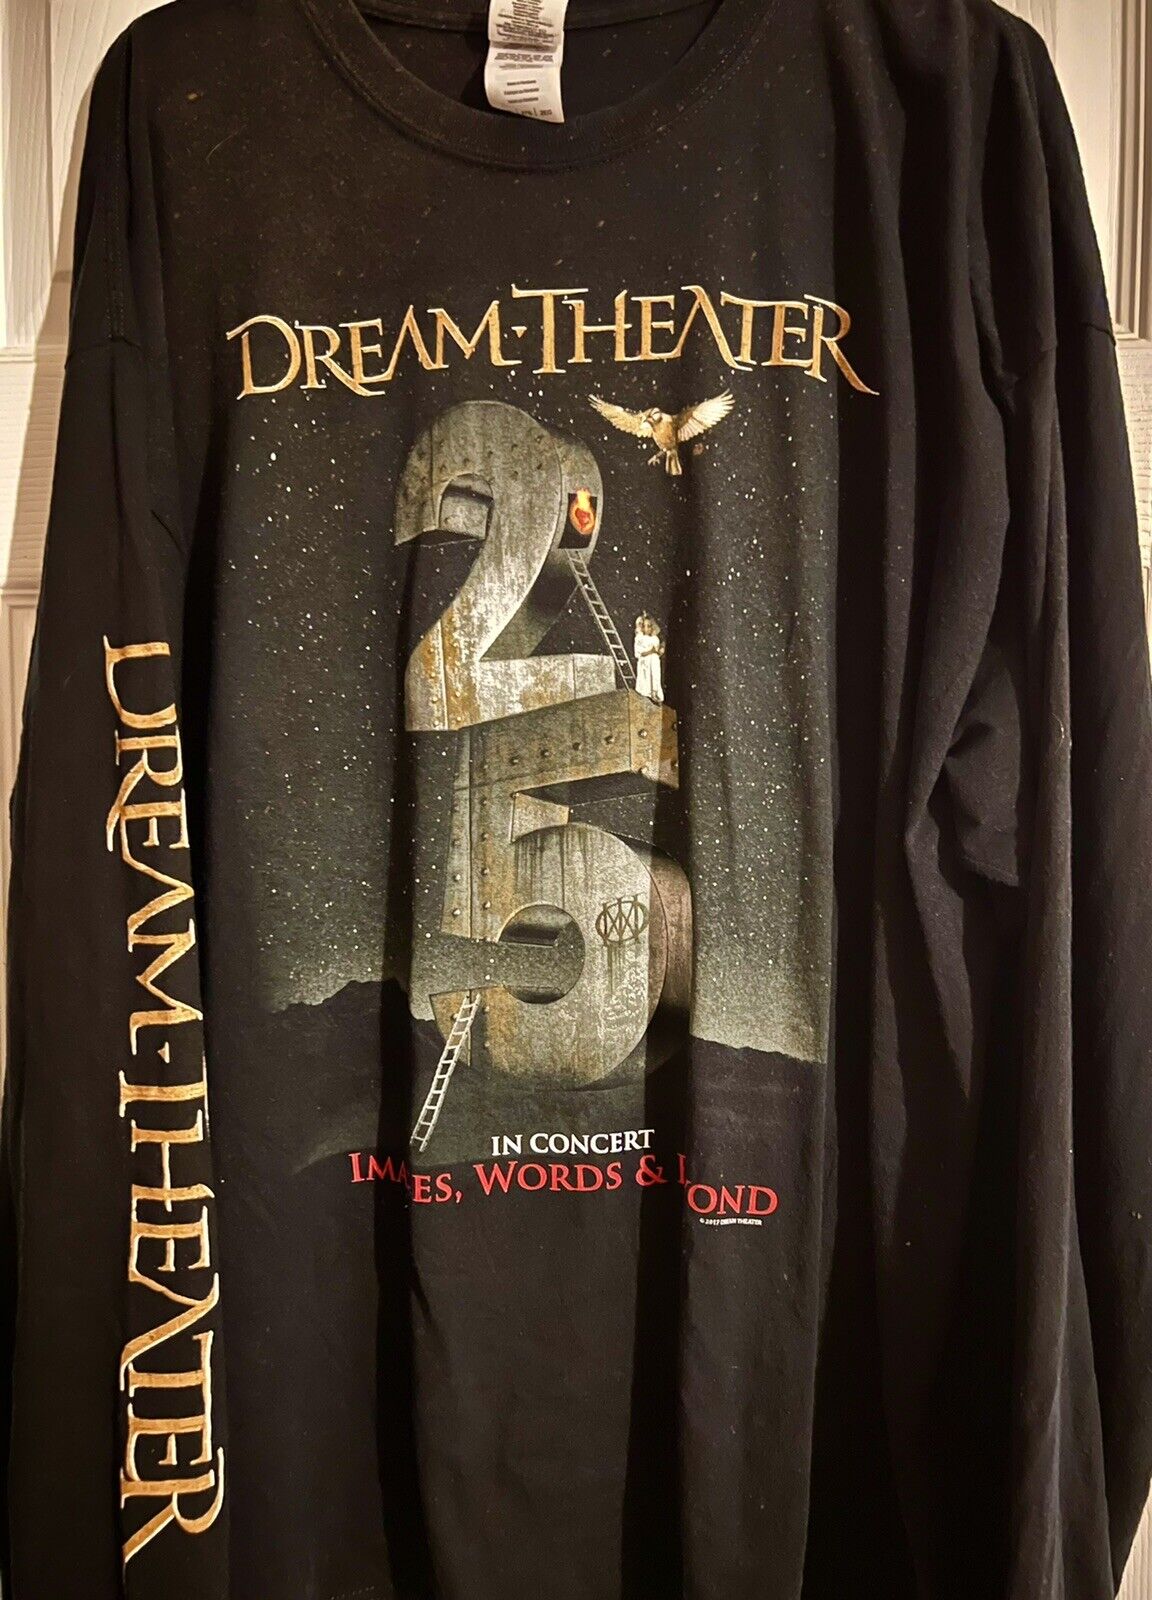 Dream Theater 2017 25th Anniversary Images And Words long sleeve tour shirt xxl.